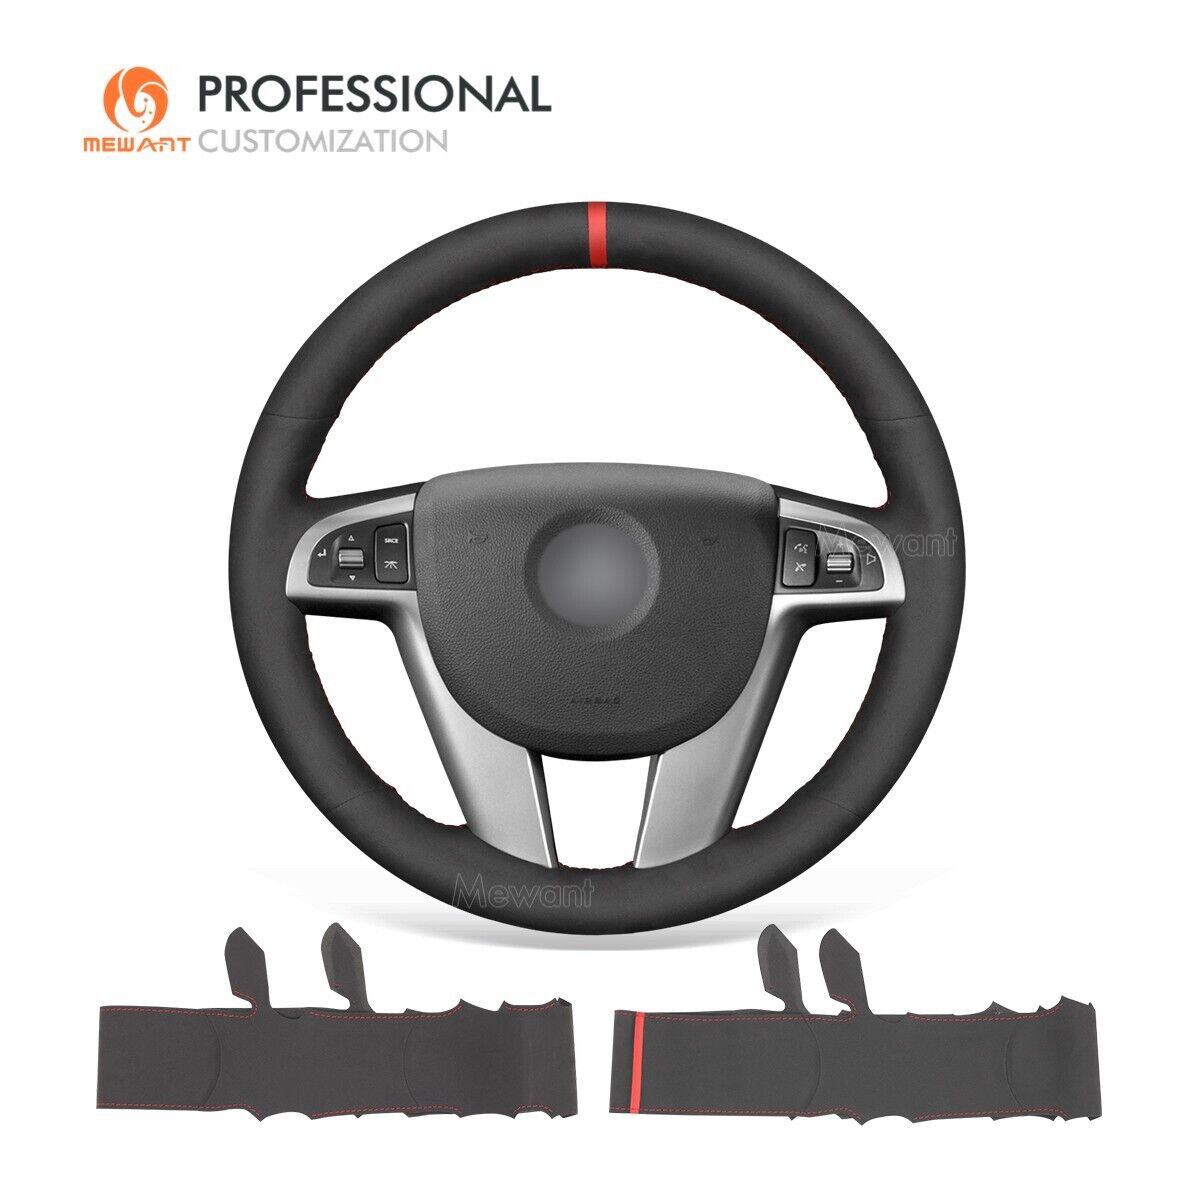 MEWANT DIY Suede Steering Wheel Cover for Holden Commodore Ute Calais 2006-2012